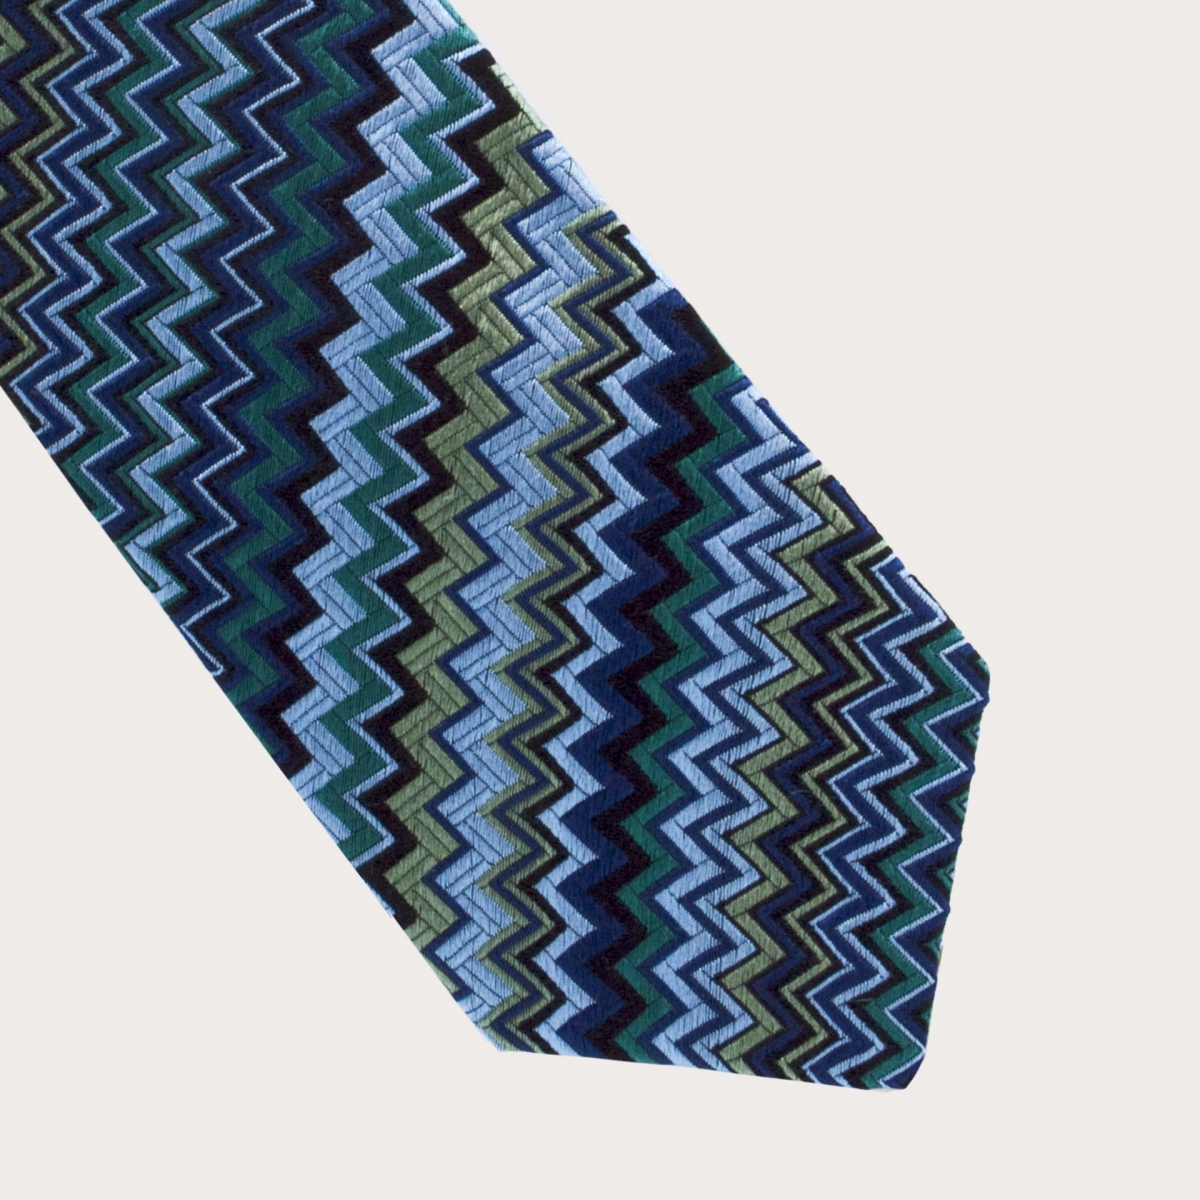 Brucle silk tie waves made in italy